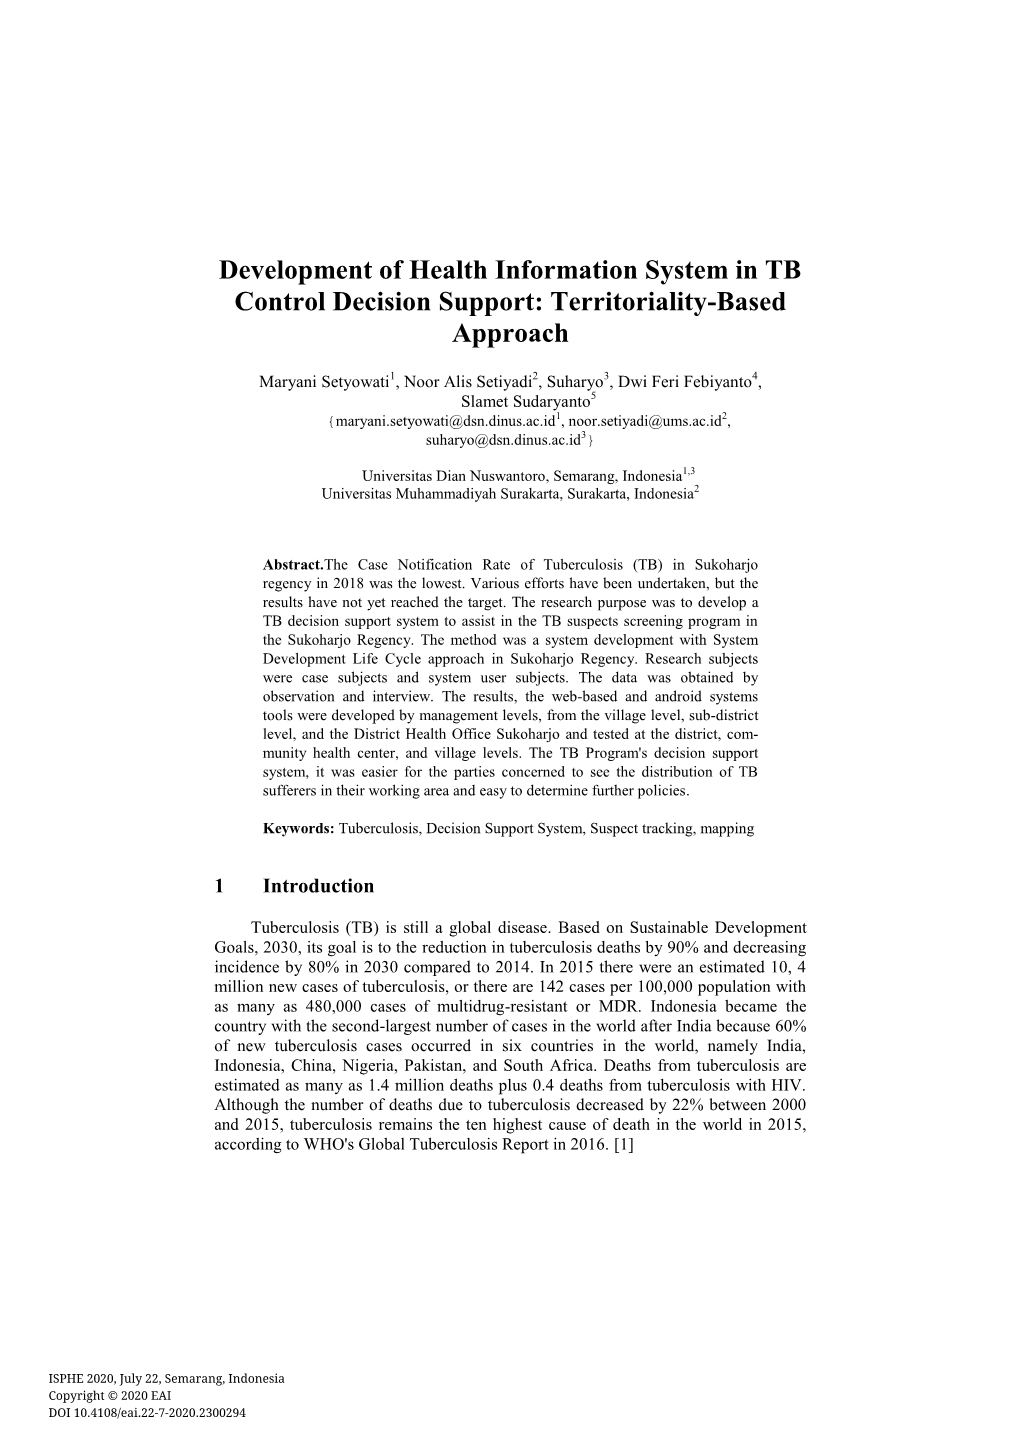 Development of Health Information System in TB Control Decision Support: Territoriality-Based Approach